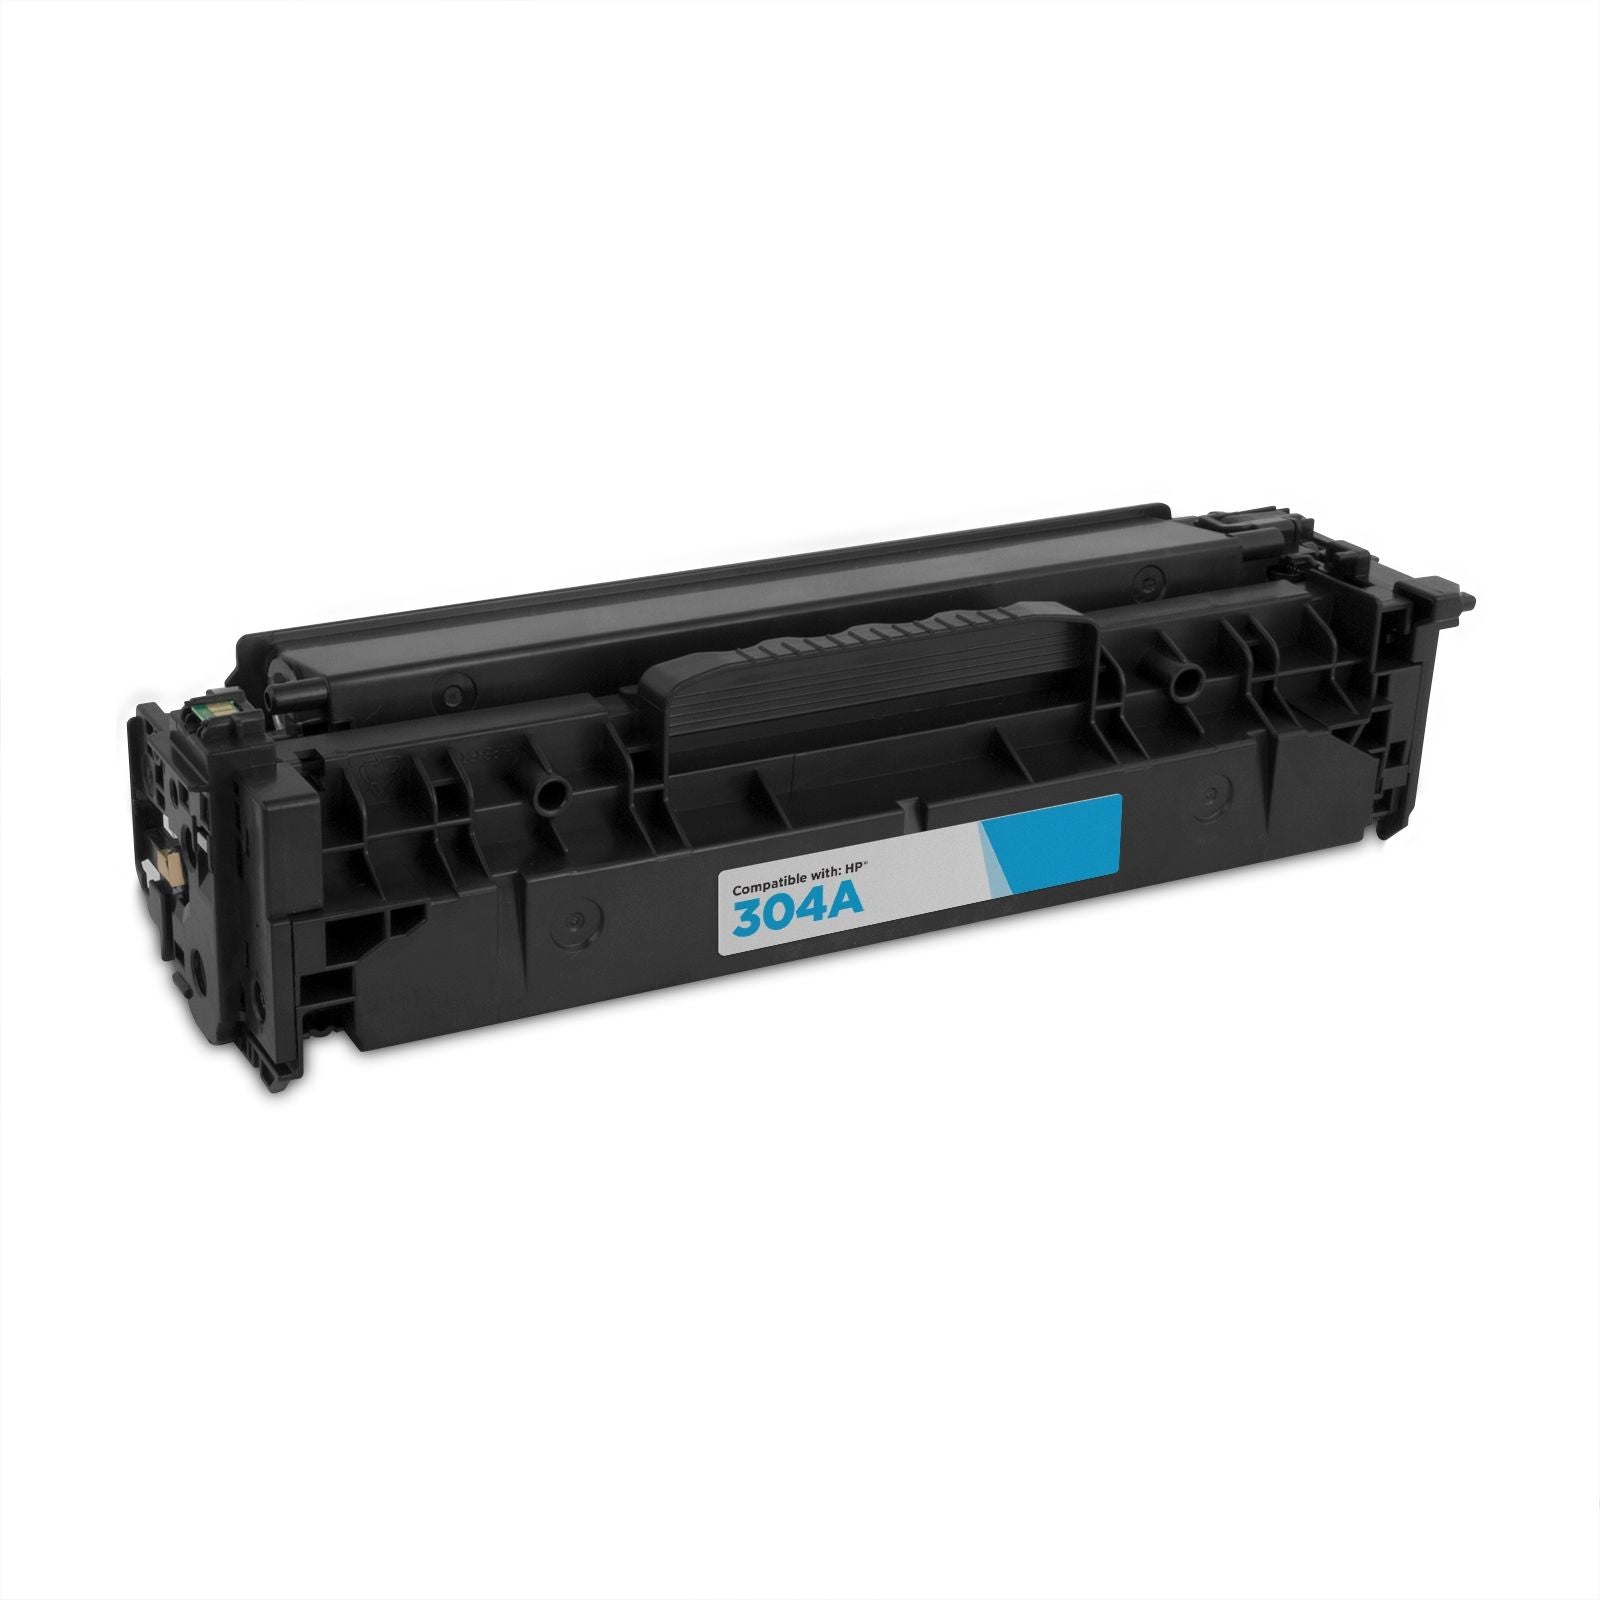 IMPERIAL BRAND Compatible toner cartridge for HP 304A  CYAN TONER 2800 PAGES